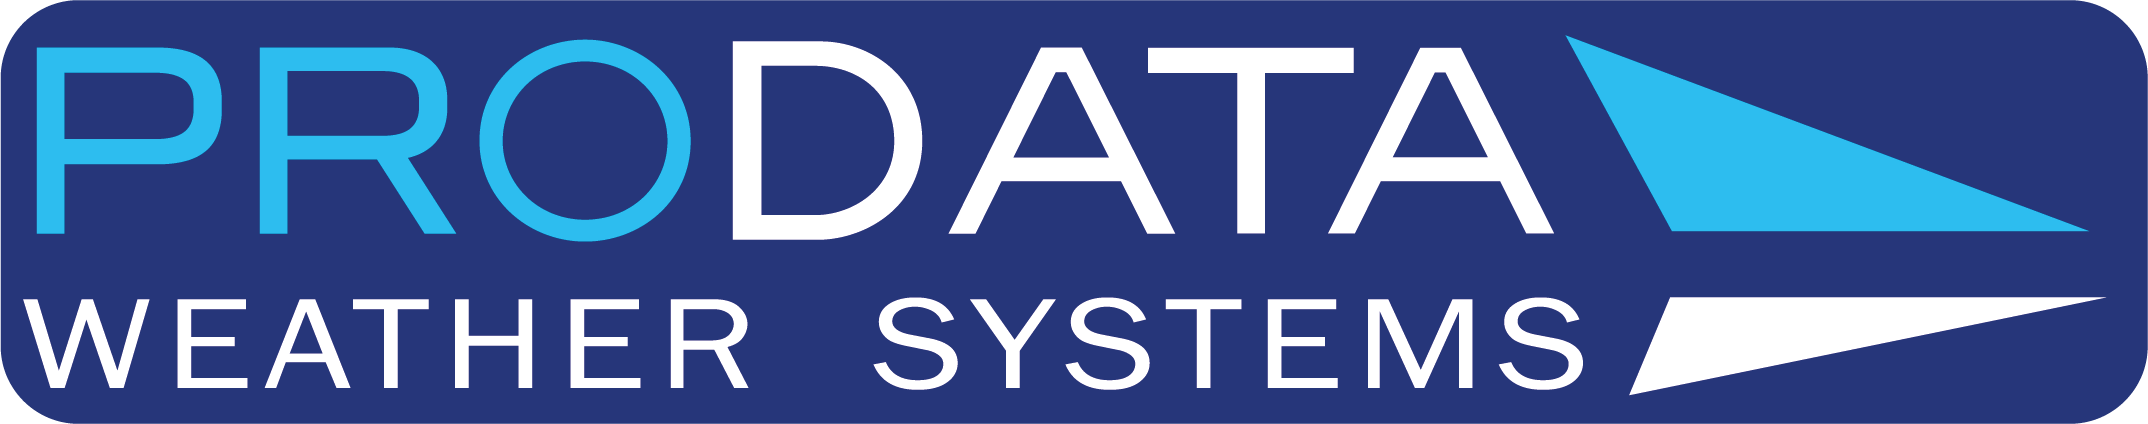 Prodata Weather Systems